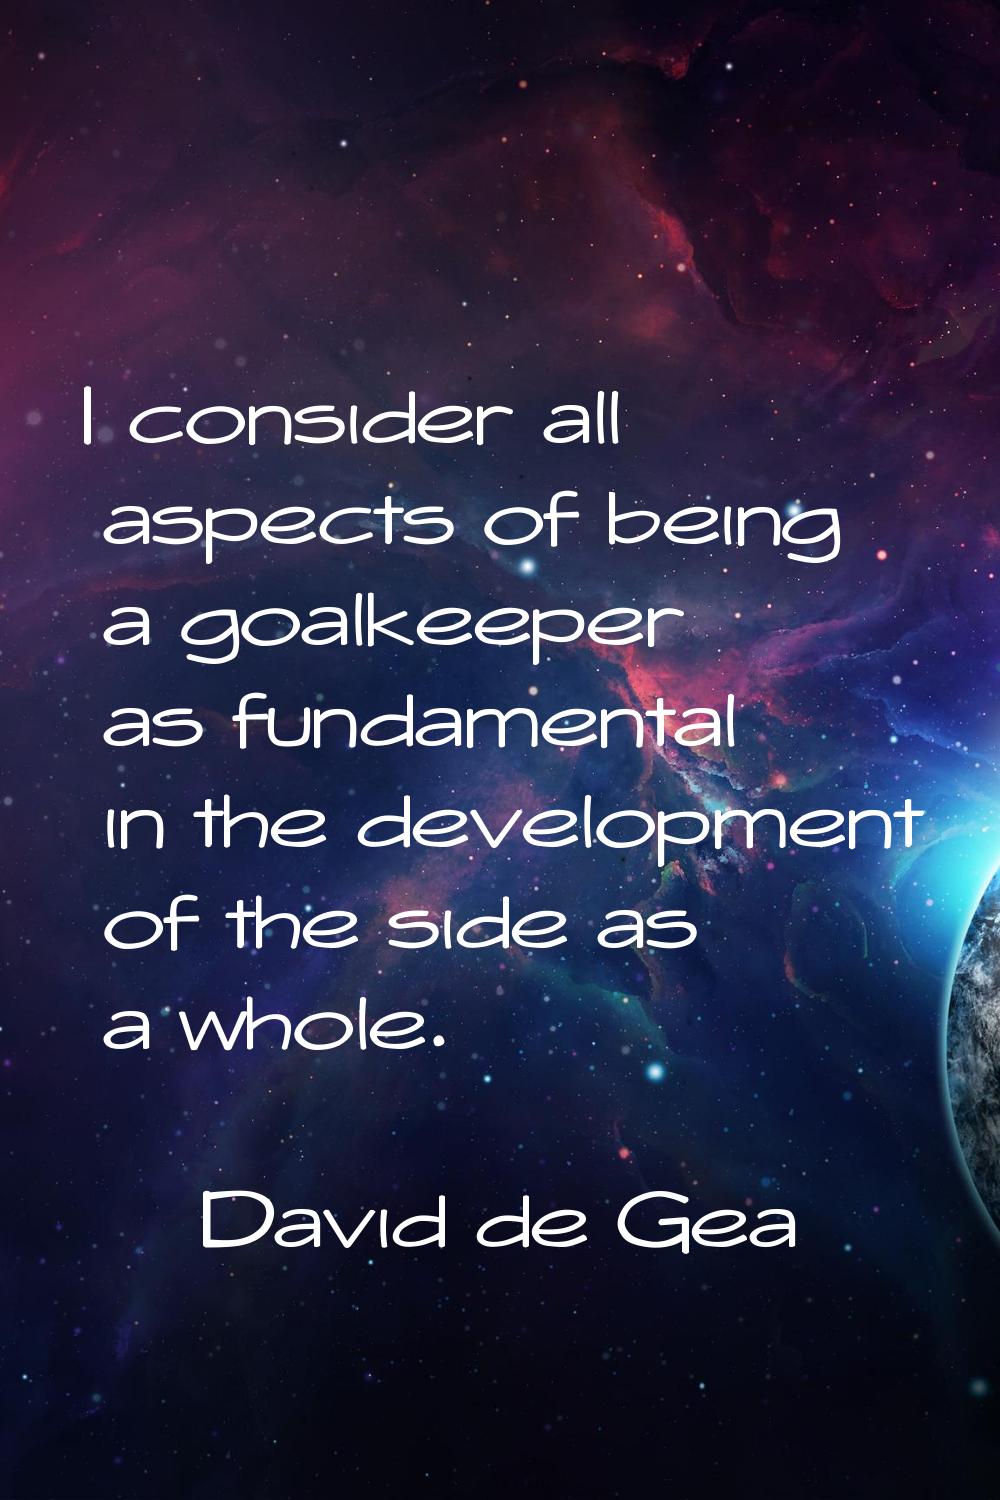 I consider all aspects of being a goalkeeper as fundamental in the development of the side as a who